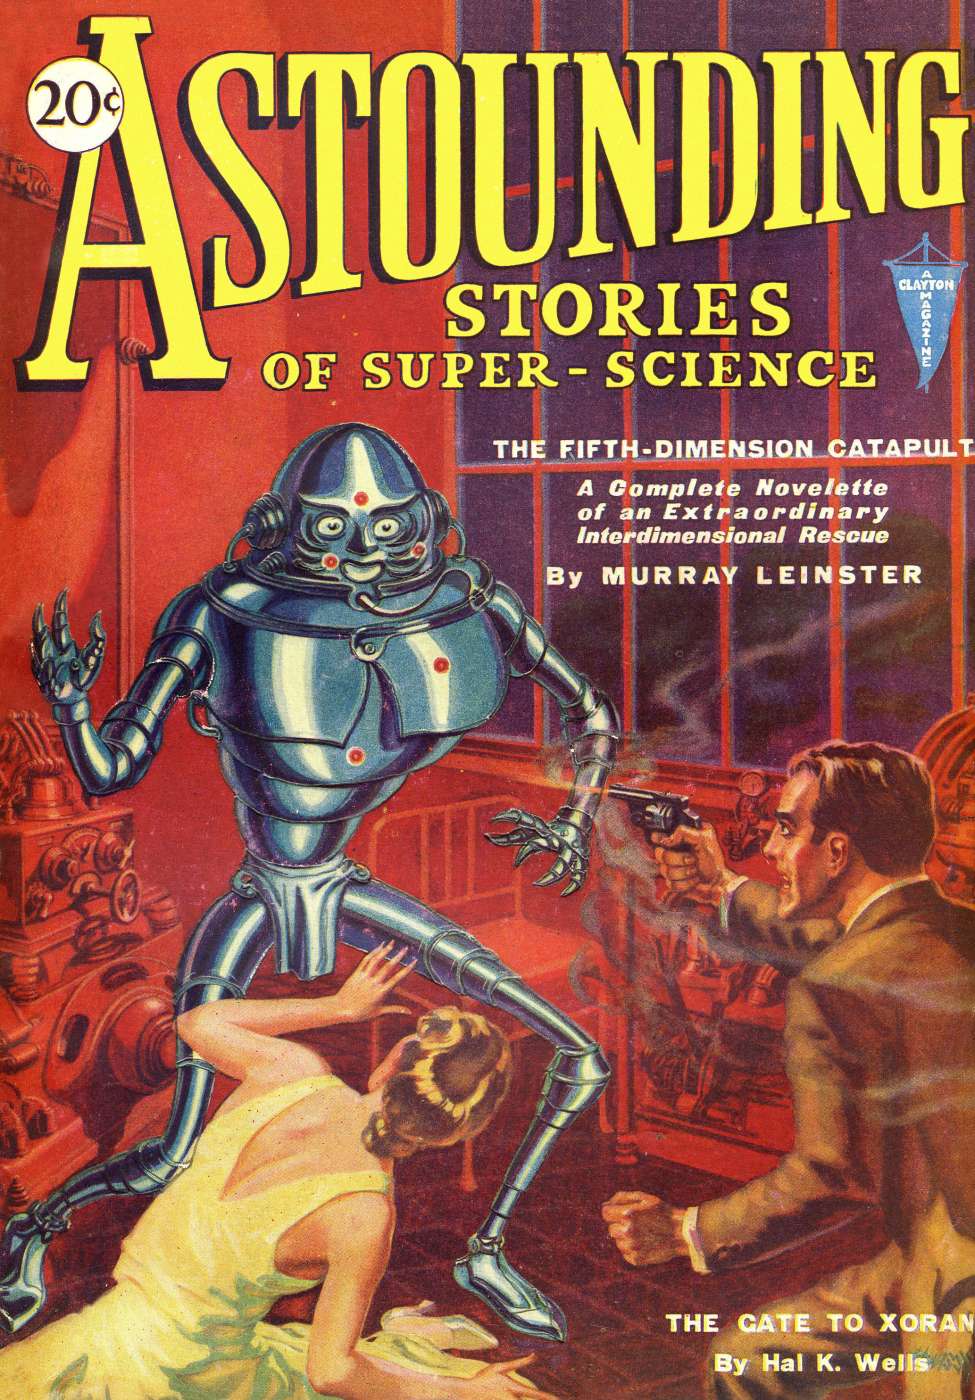 Book Cover For Astounding v5 1 - The Fifth-Dimension Catapult - Murray Leinster